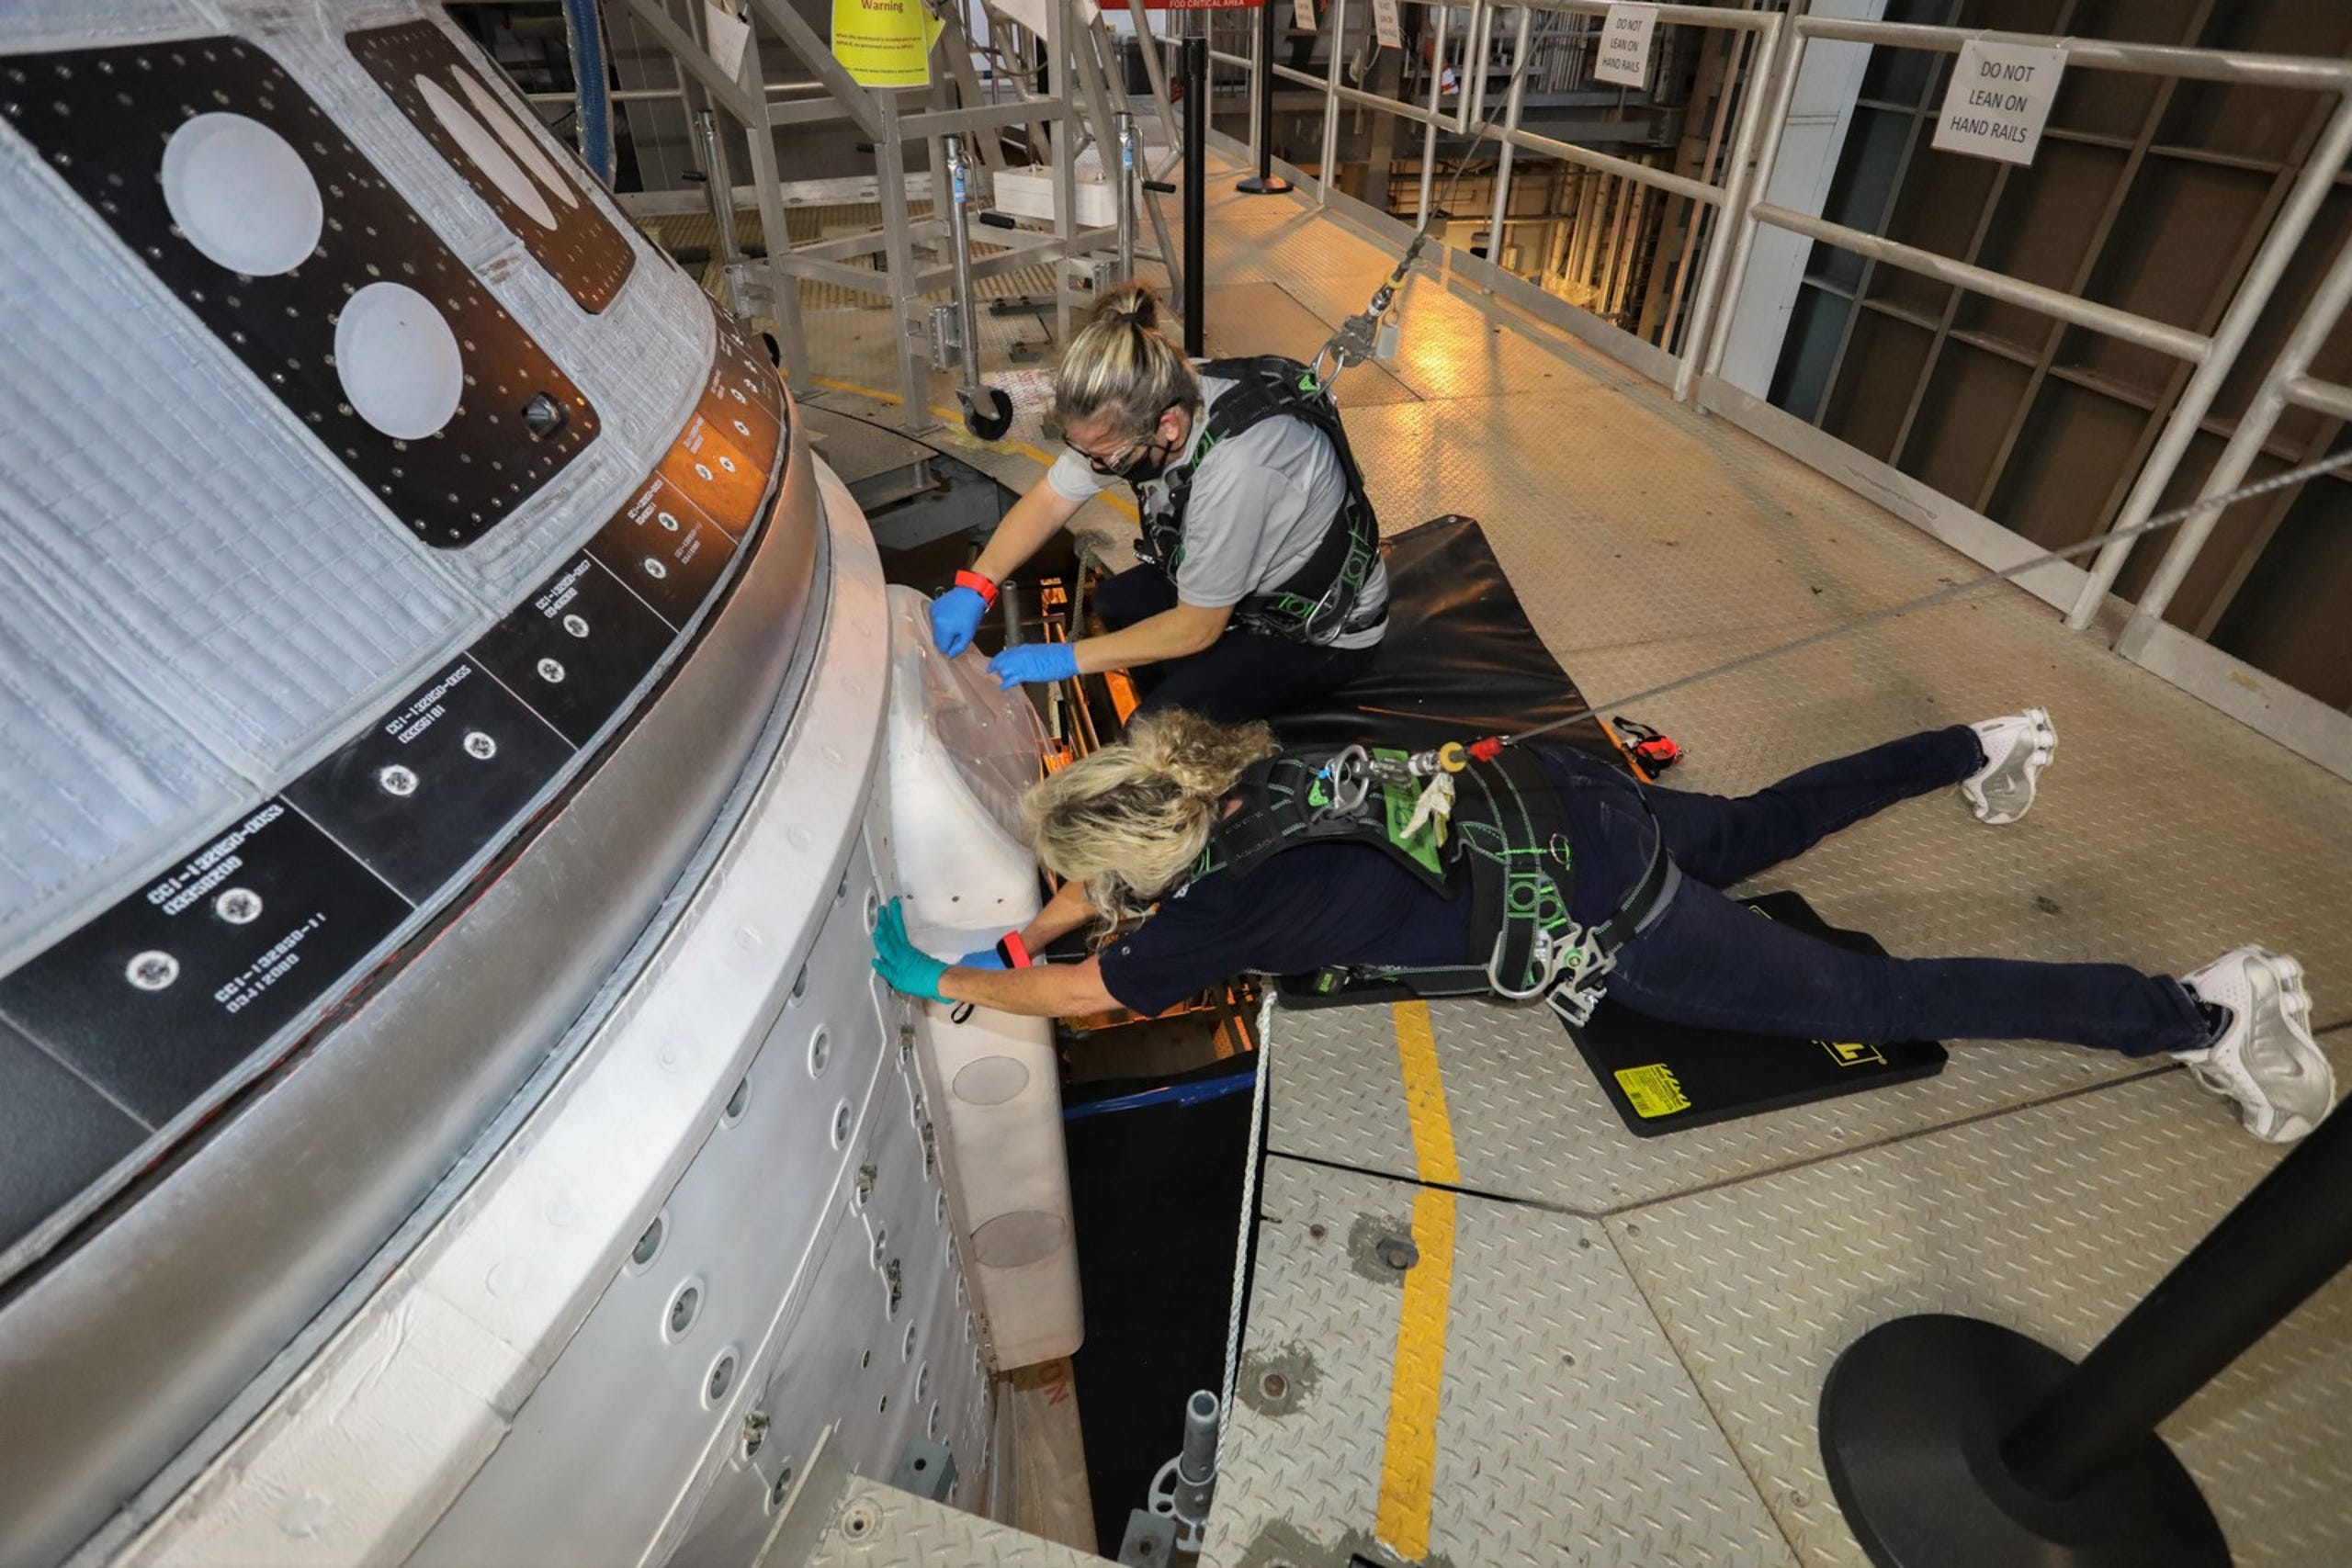 Boeing teams working on the propulsion system valve problem that halted the second attempt of the Starliner's orbital flight test.